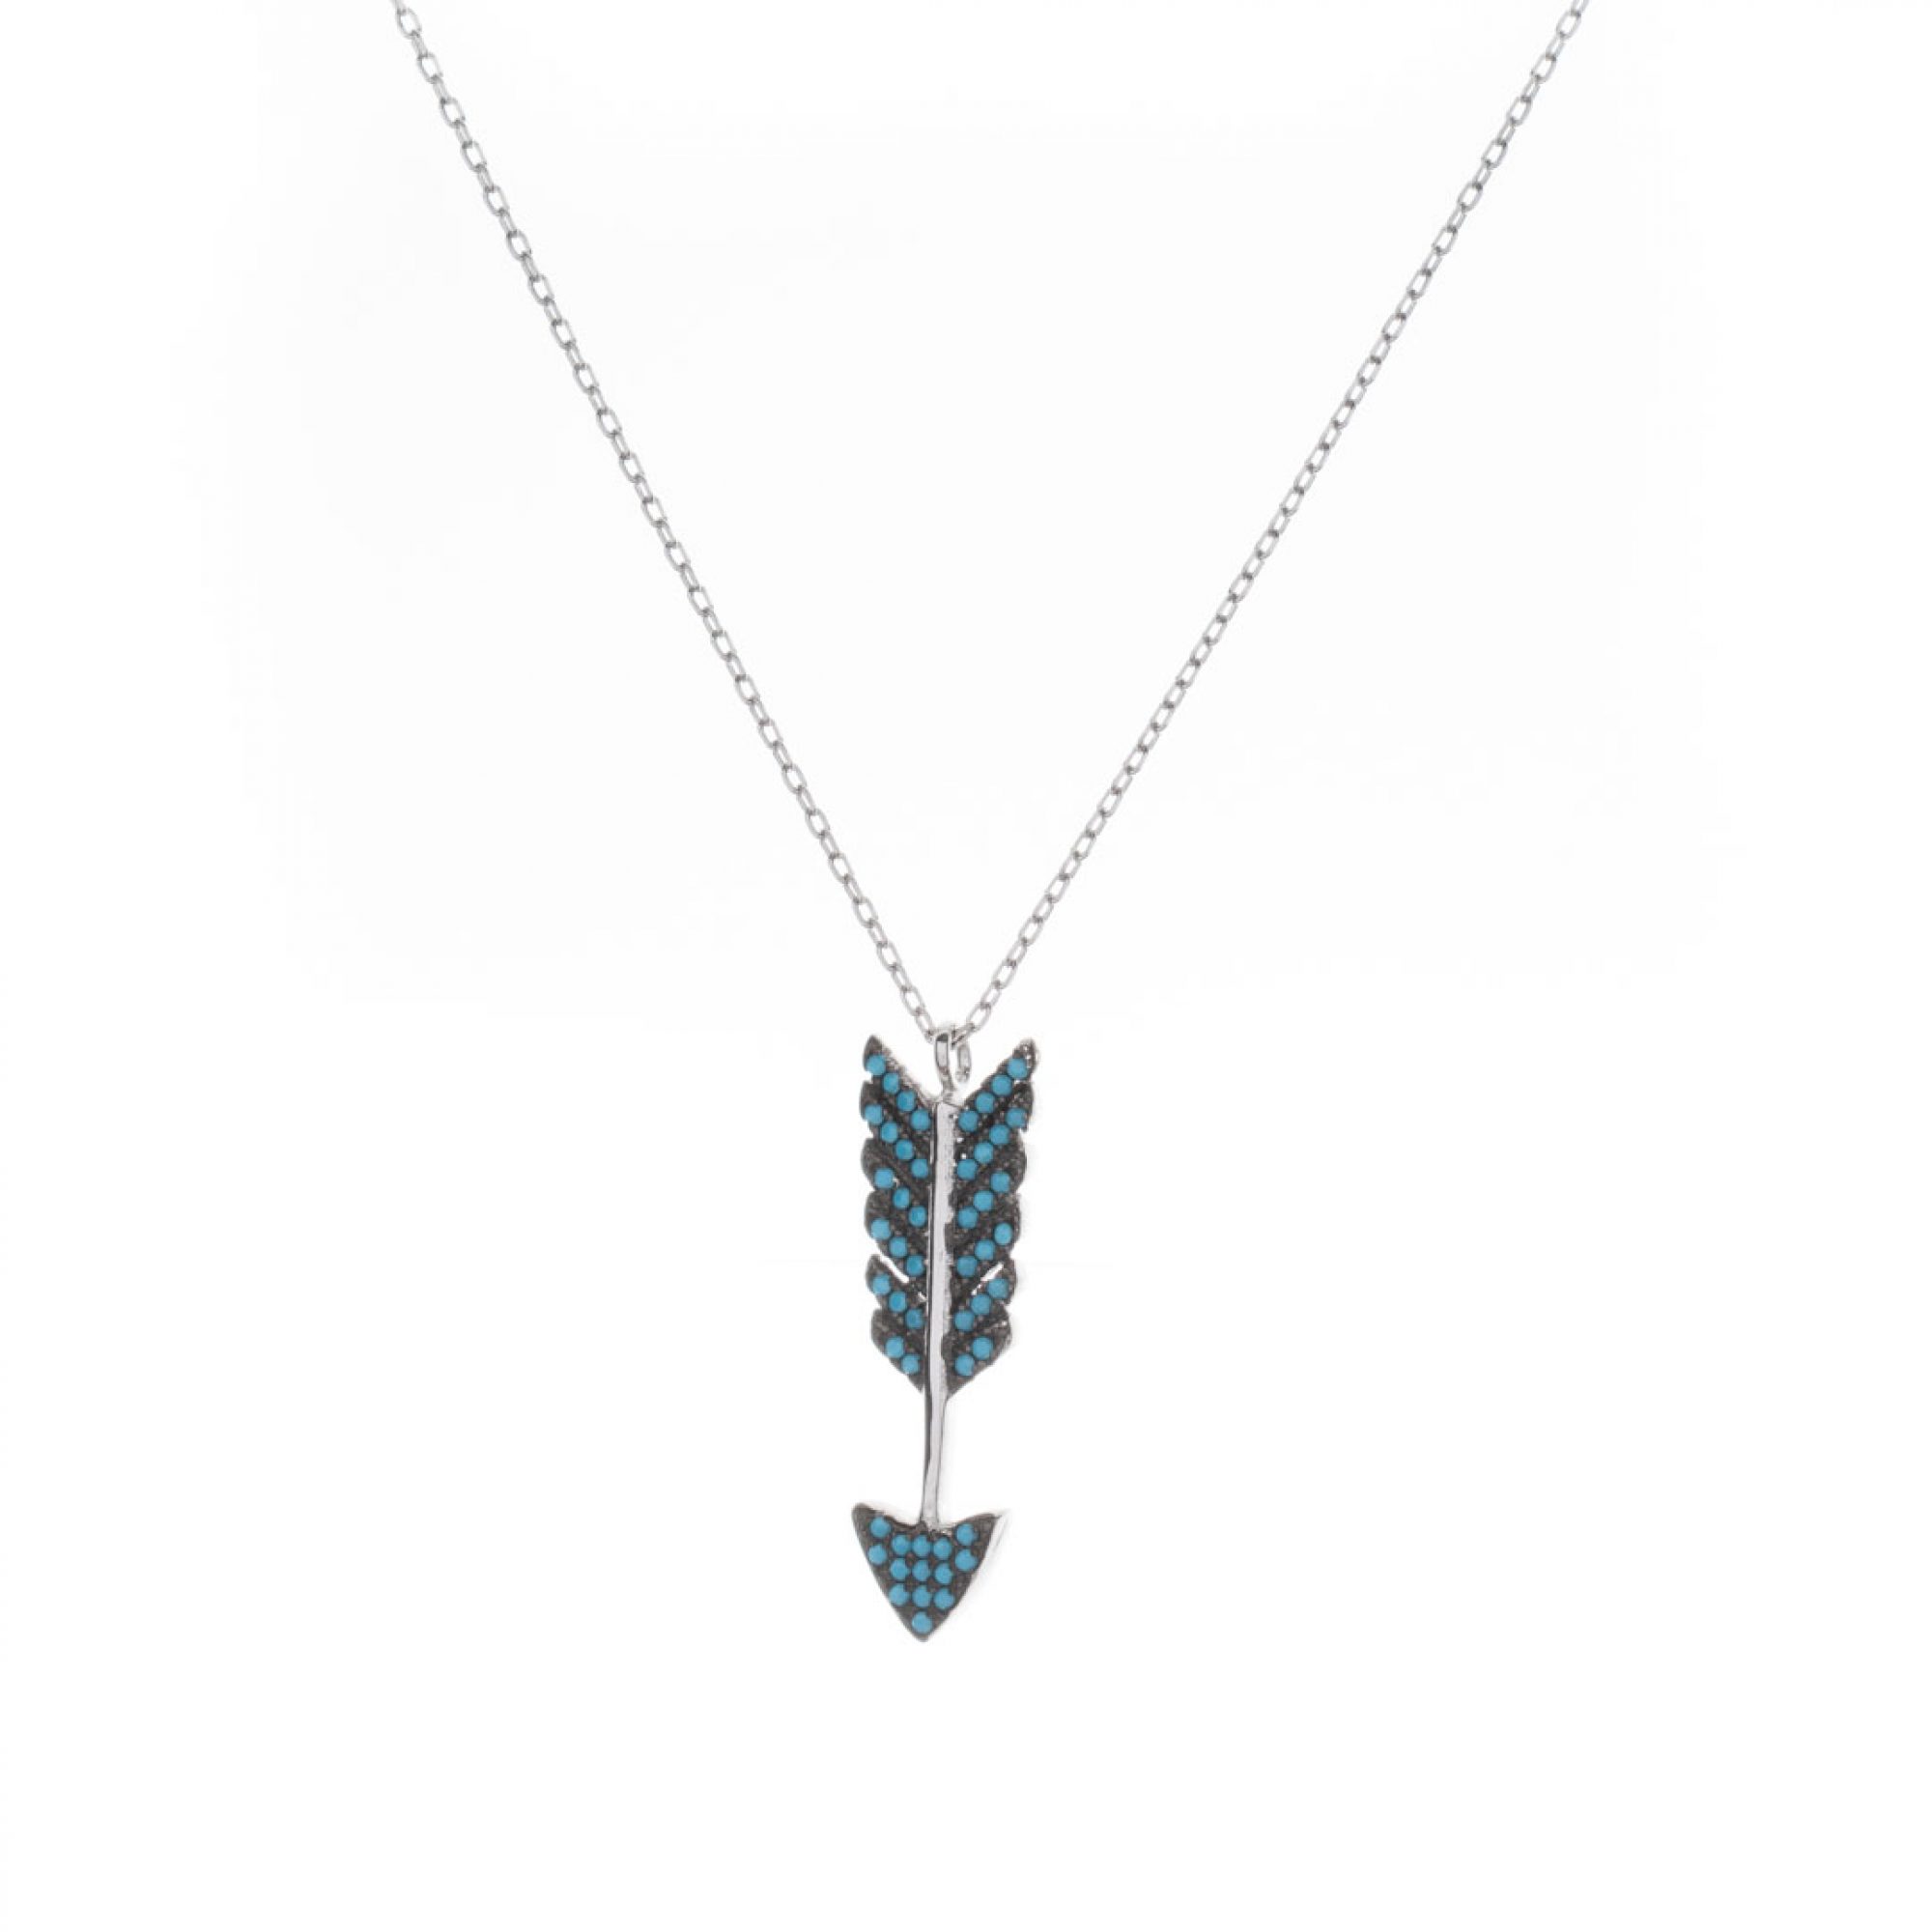 Arrow necklace with turquoise stones